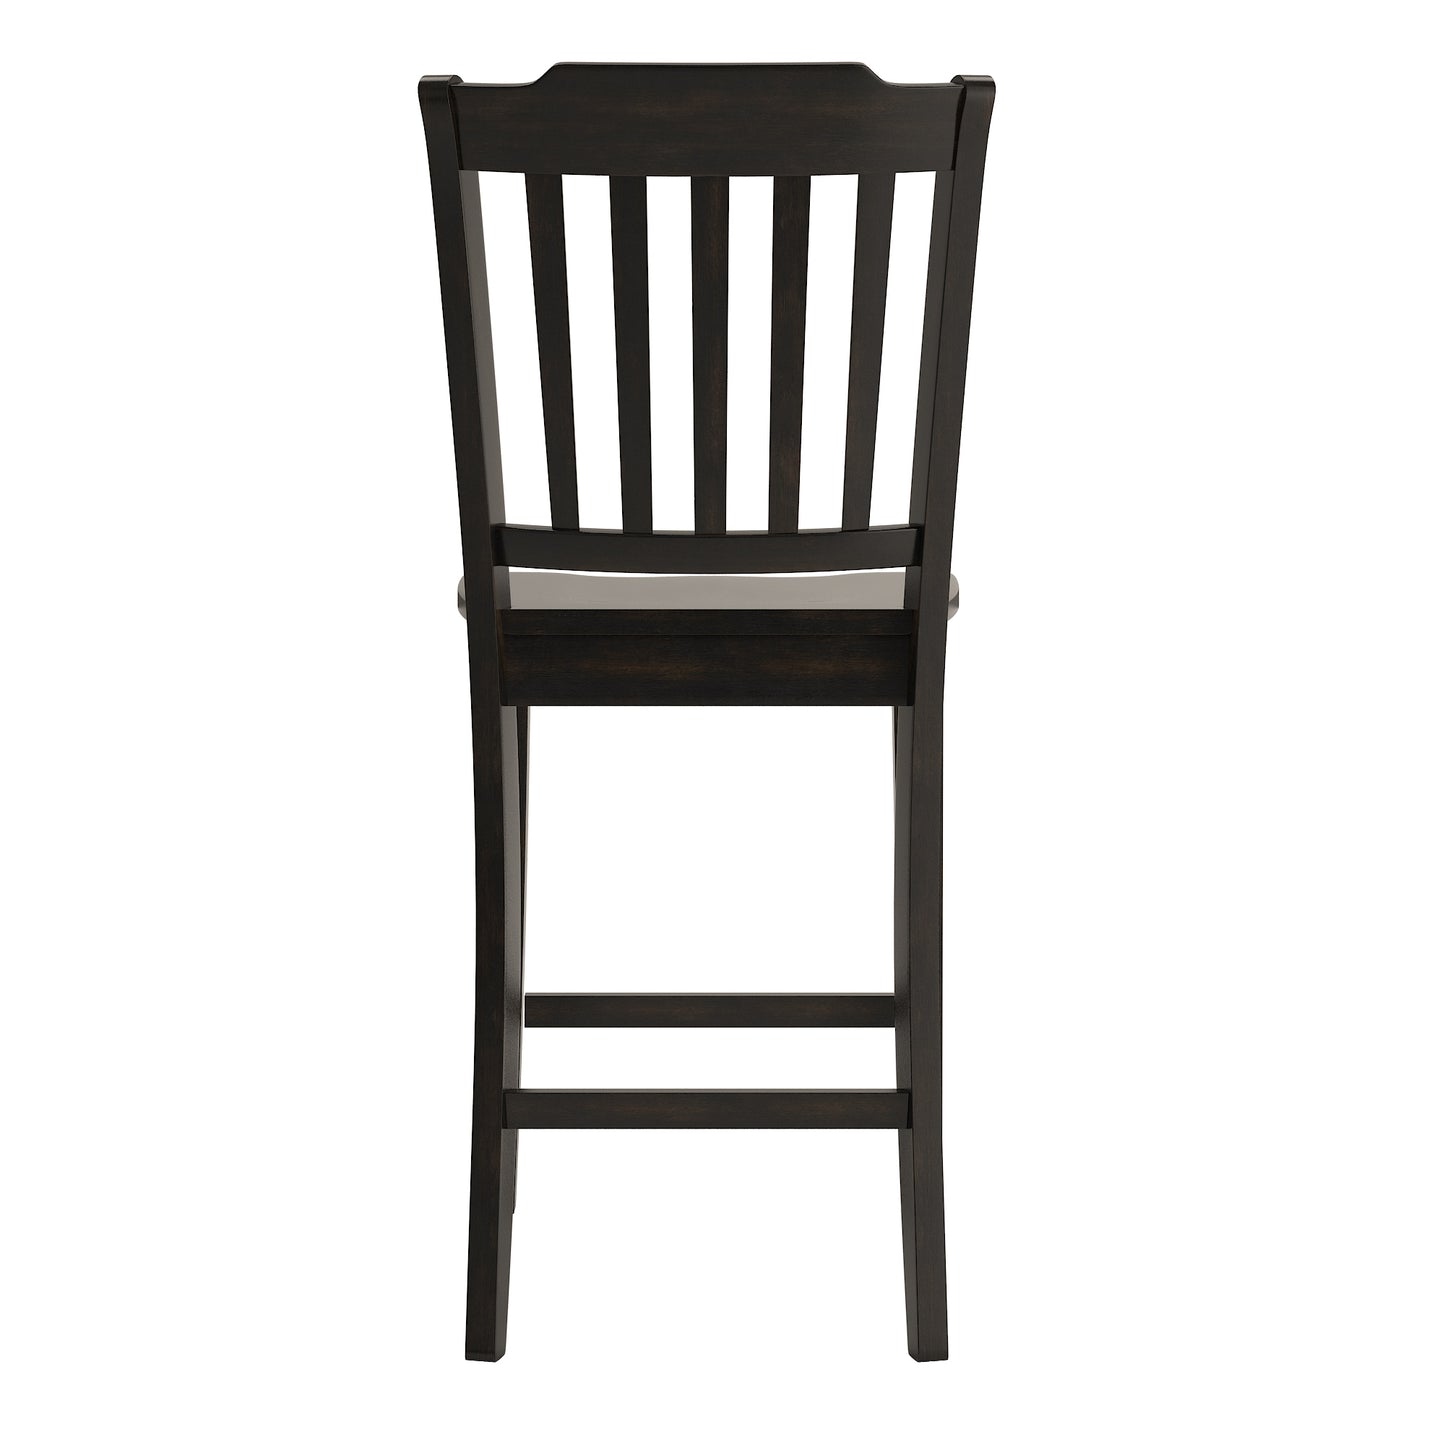 Slat Back Wood Counter Height Chairs (Set of 2) - Antique Black Finish